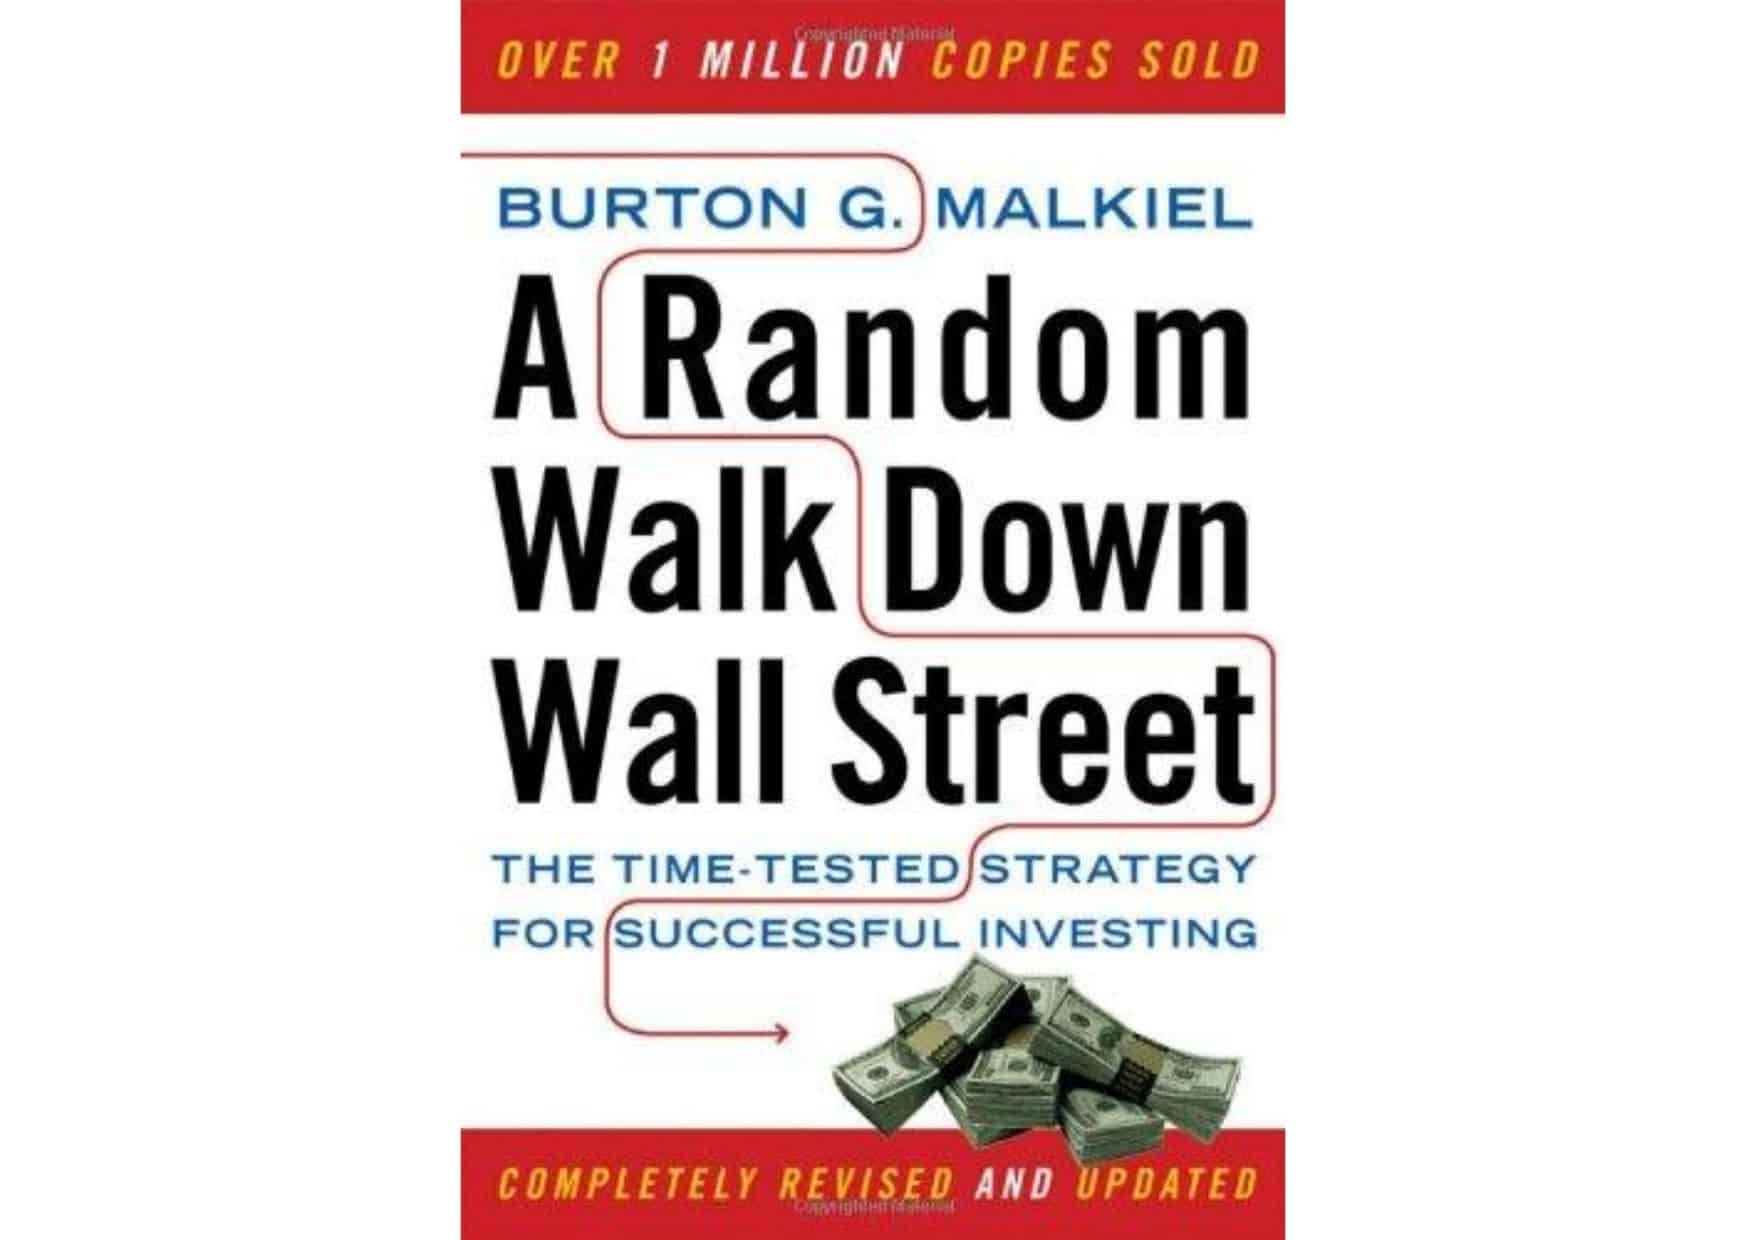 25 Important Investment Books Every Entrepreneur Needs to Read